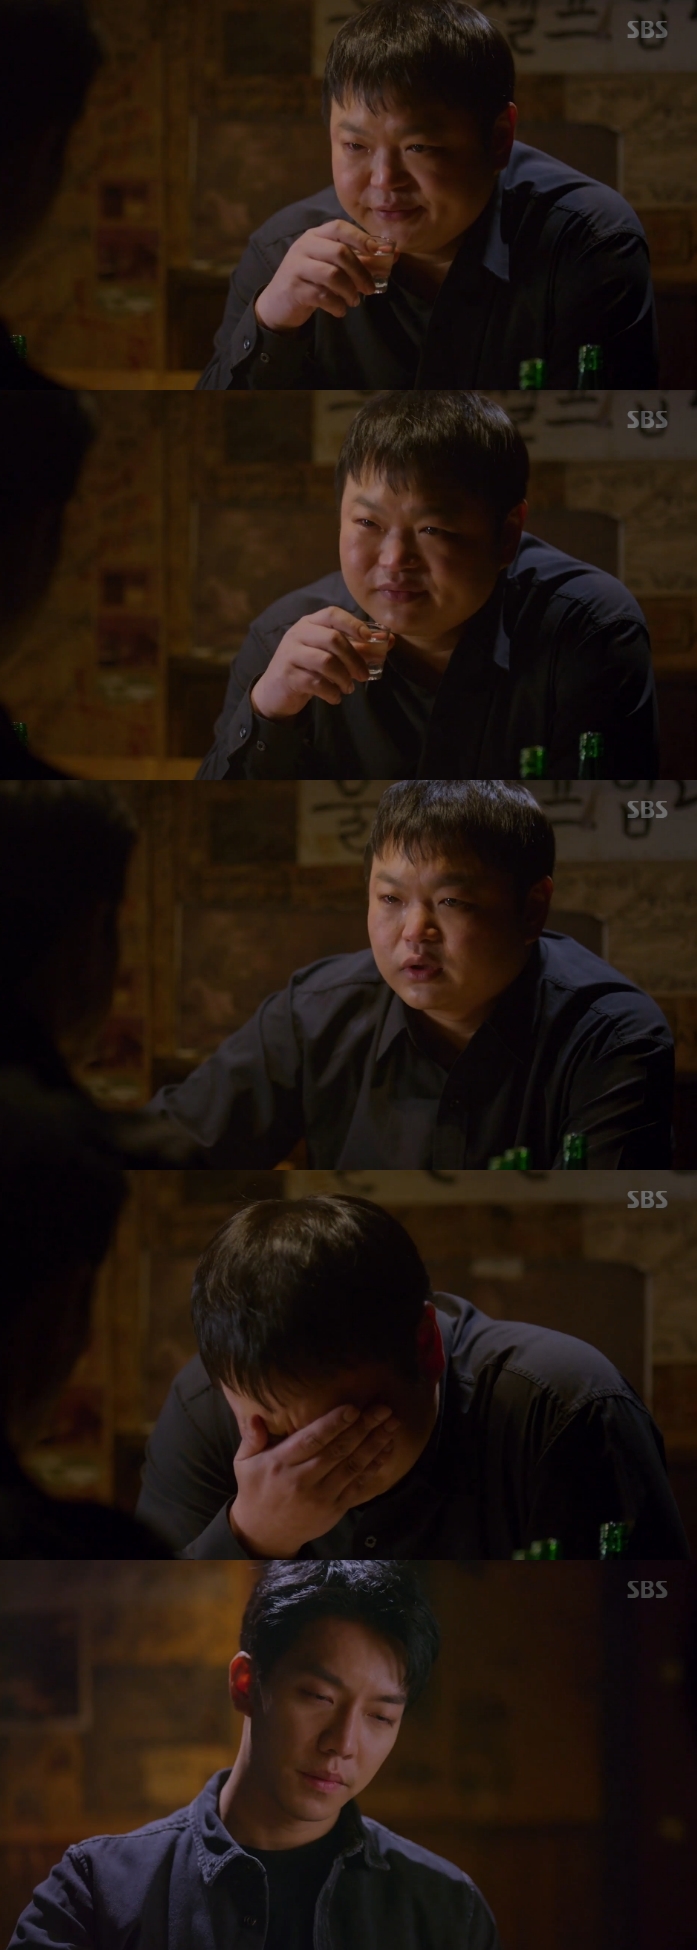 Ko Kyu-Phill of Vagabond fizzled in front of Lee Seung-giIn the 7th episode of SBSs gilt drama Vagabond, which was broadcast on the 11th, Cha Dal-gun (Lee Seung-gi) and Night Light Productions (Ko Kyu-Phill) met and were shown tipping their glasses.Night Light Productions then said: If you dont drink, you sleep on the seal. Its hard to go home with your mind. When will we be okay?The government treats us as children who have abandoned us, he said.Night Light Productions continued, But if Im okay, I feel sorry for my wife. I miss you. Take me.=